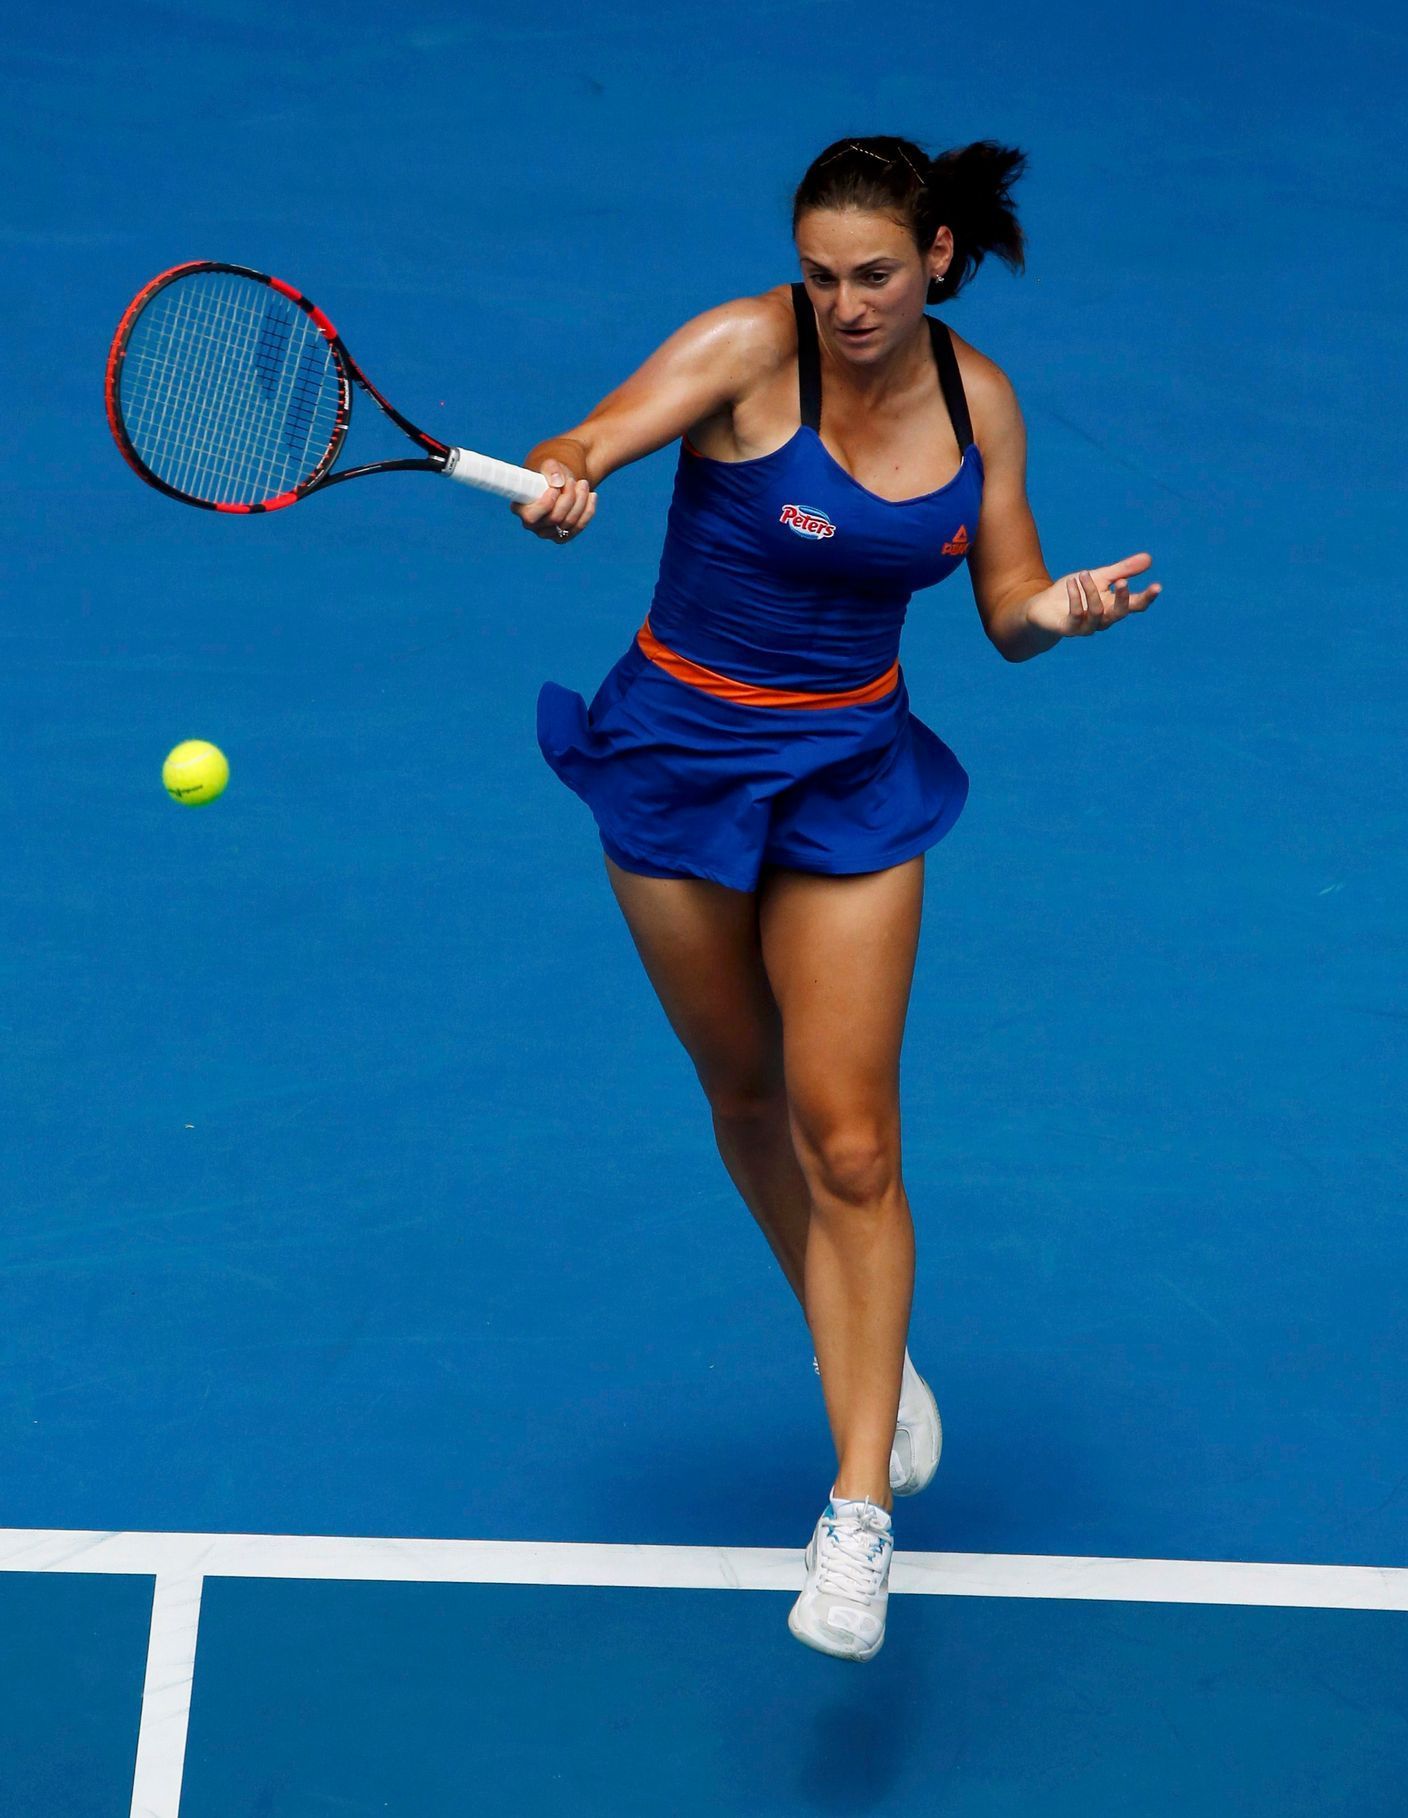 Vesna Dolonc of Serbia hits a return to Serena Williams of the U.S. during their women's singles match at the Australian Open 2014 tennis tournament in Melbourne